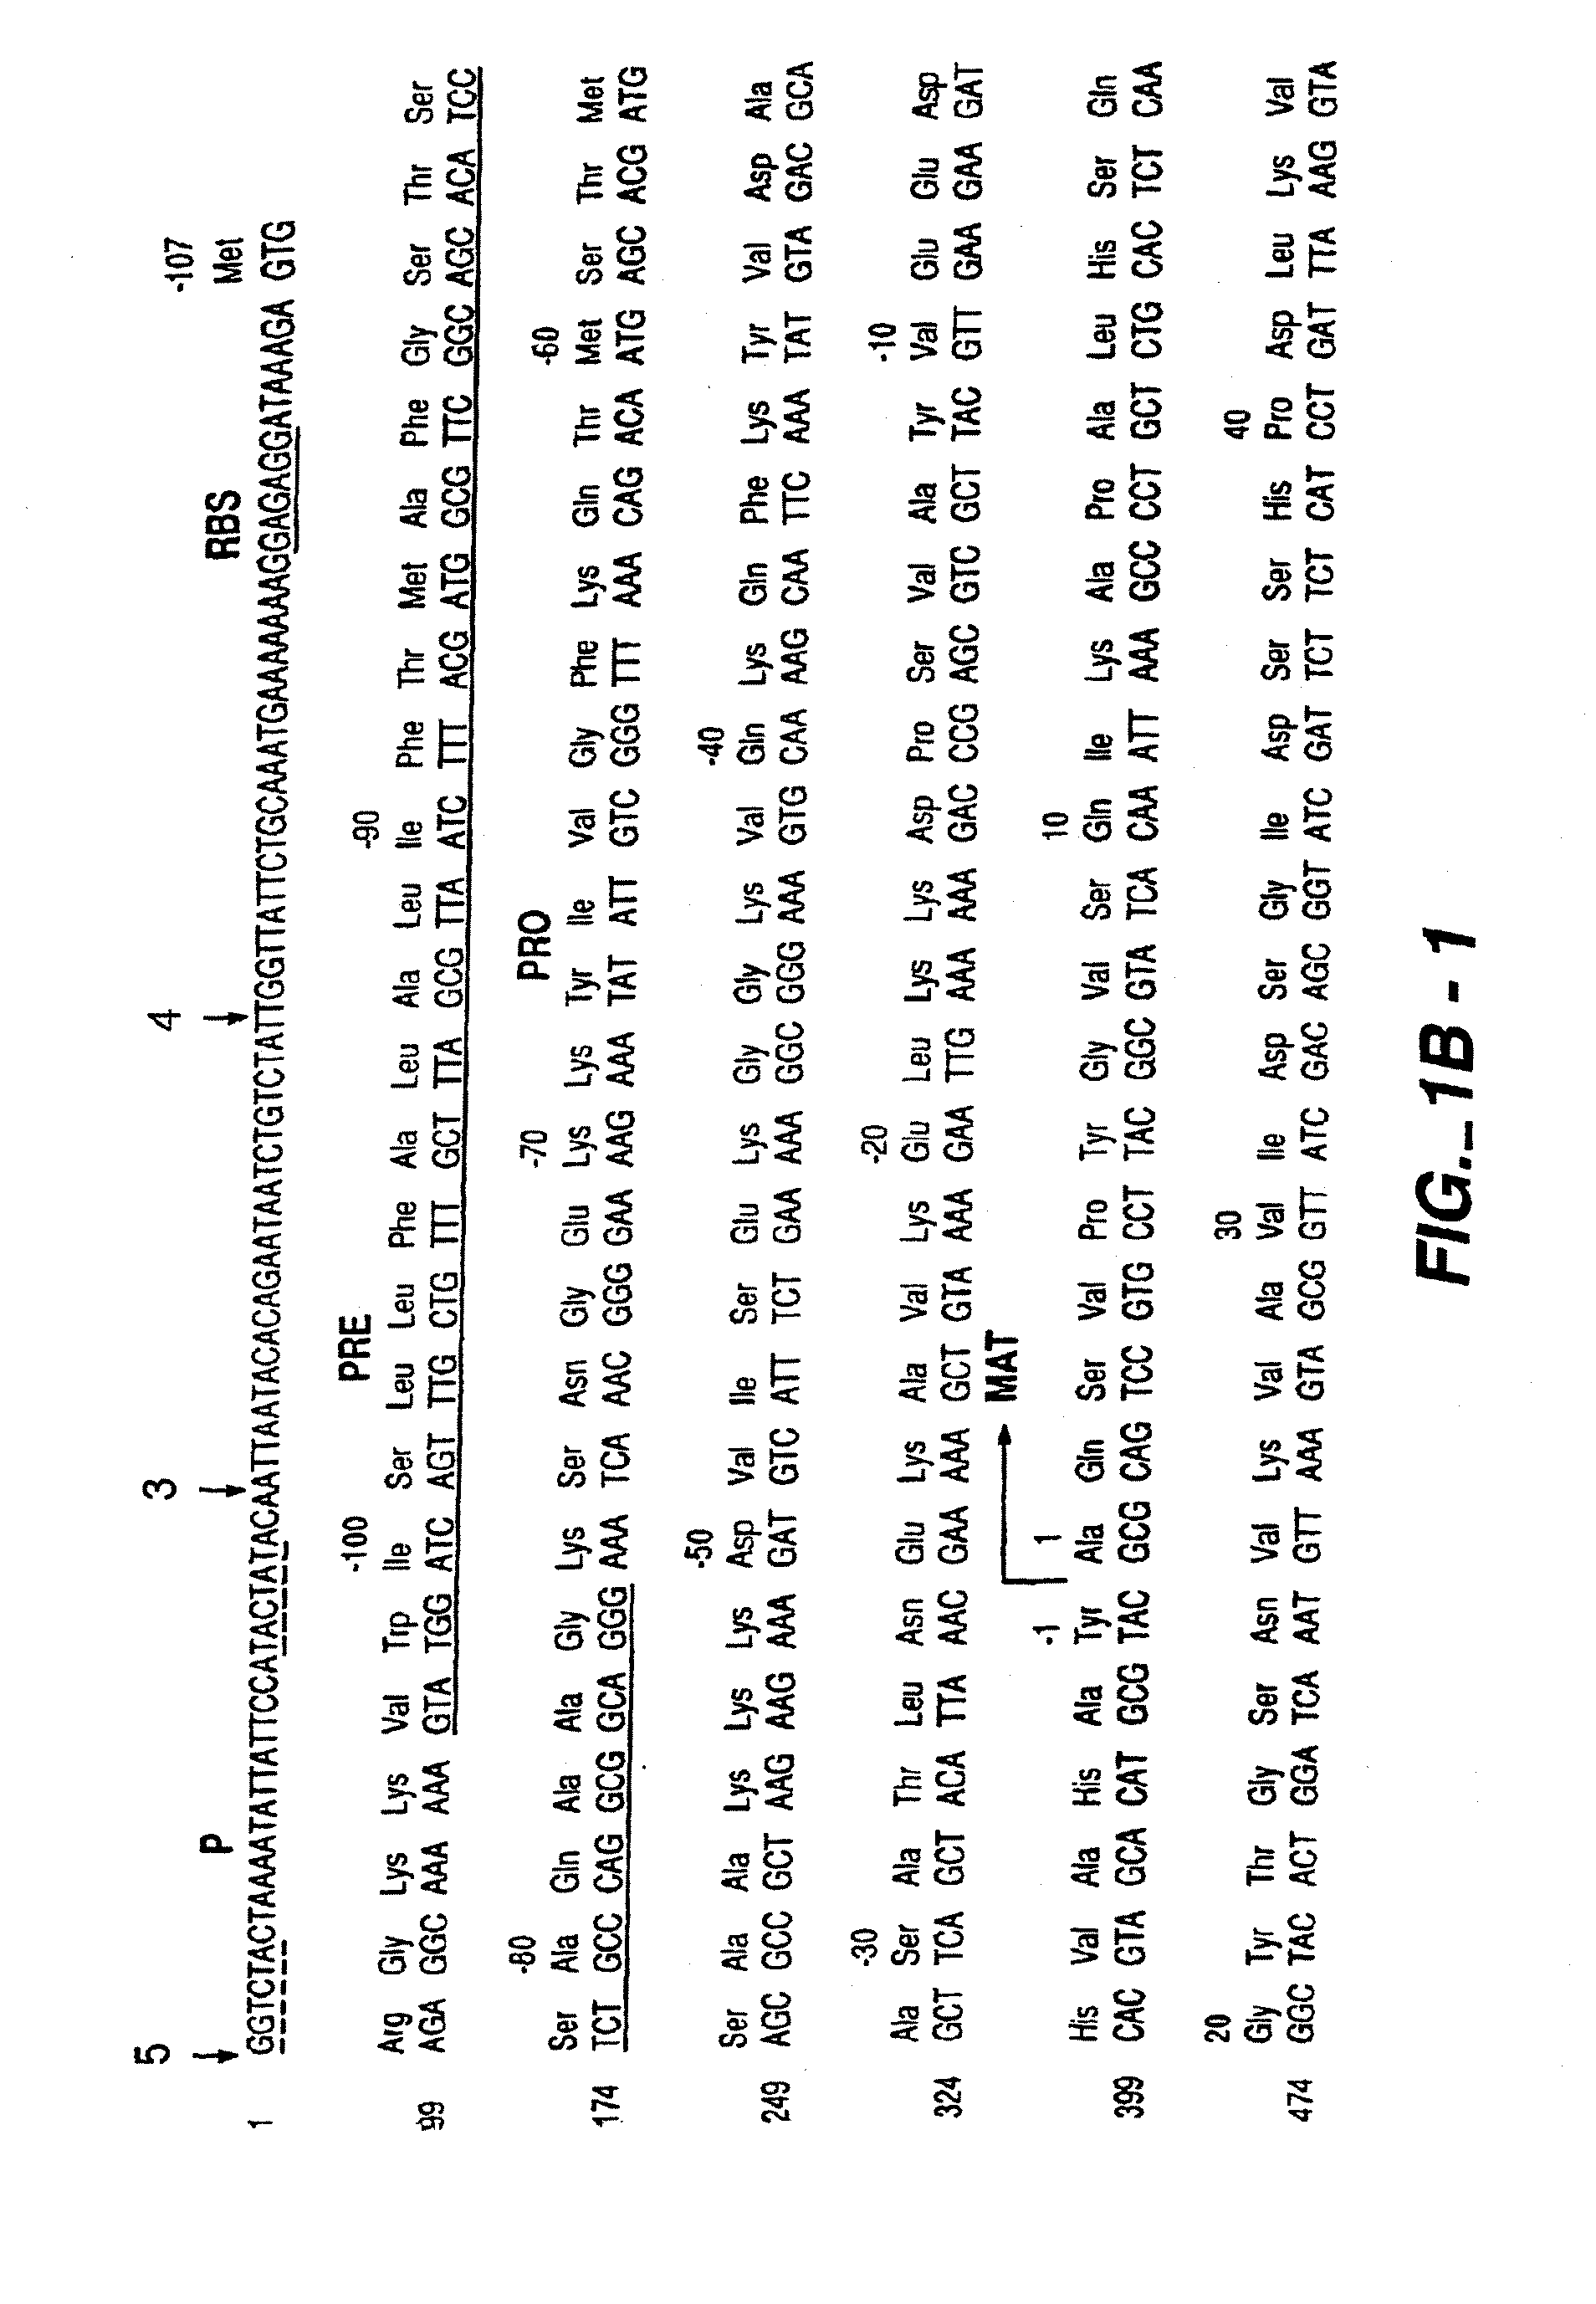 Proteases producing an altered immunogenic response and methods of making and using the same